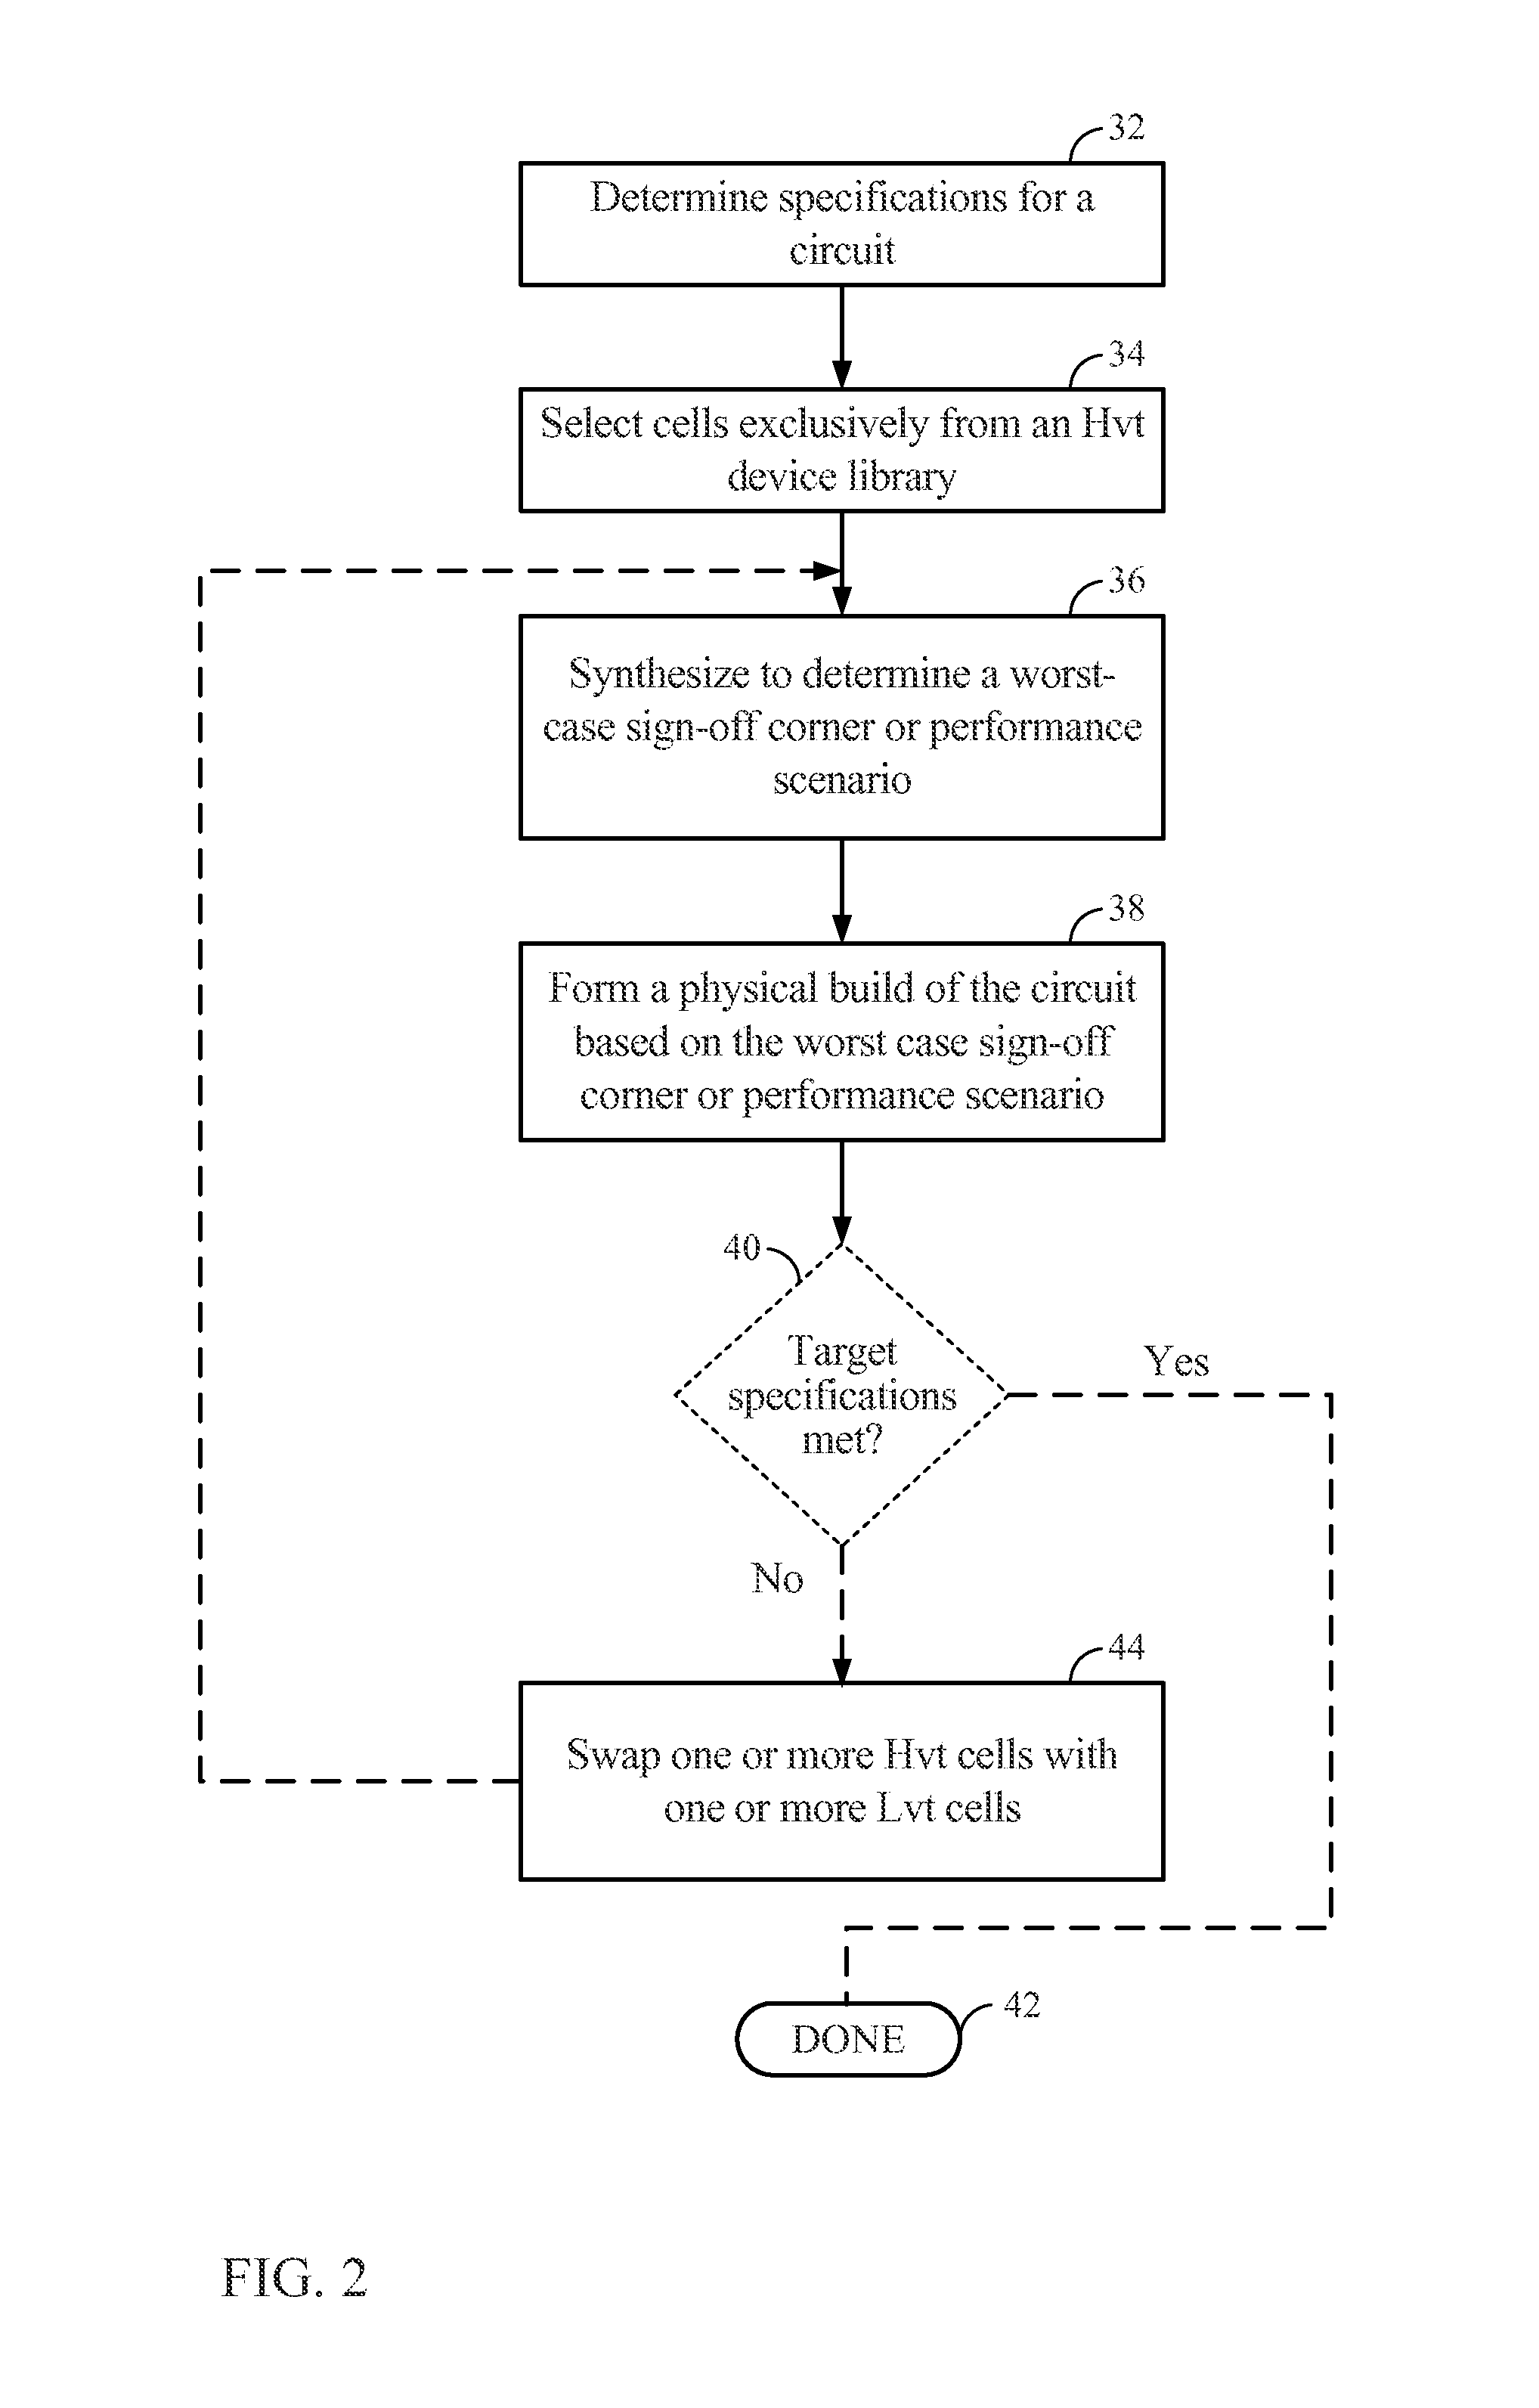 Methods and circuits for optimizing performance and power consumption in a design and circuit employing lower threshold voltage (LVT) devices